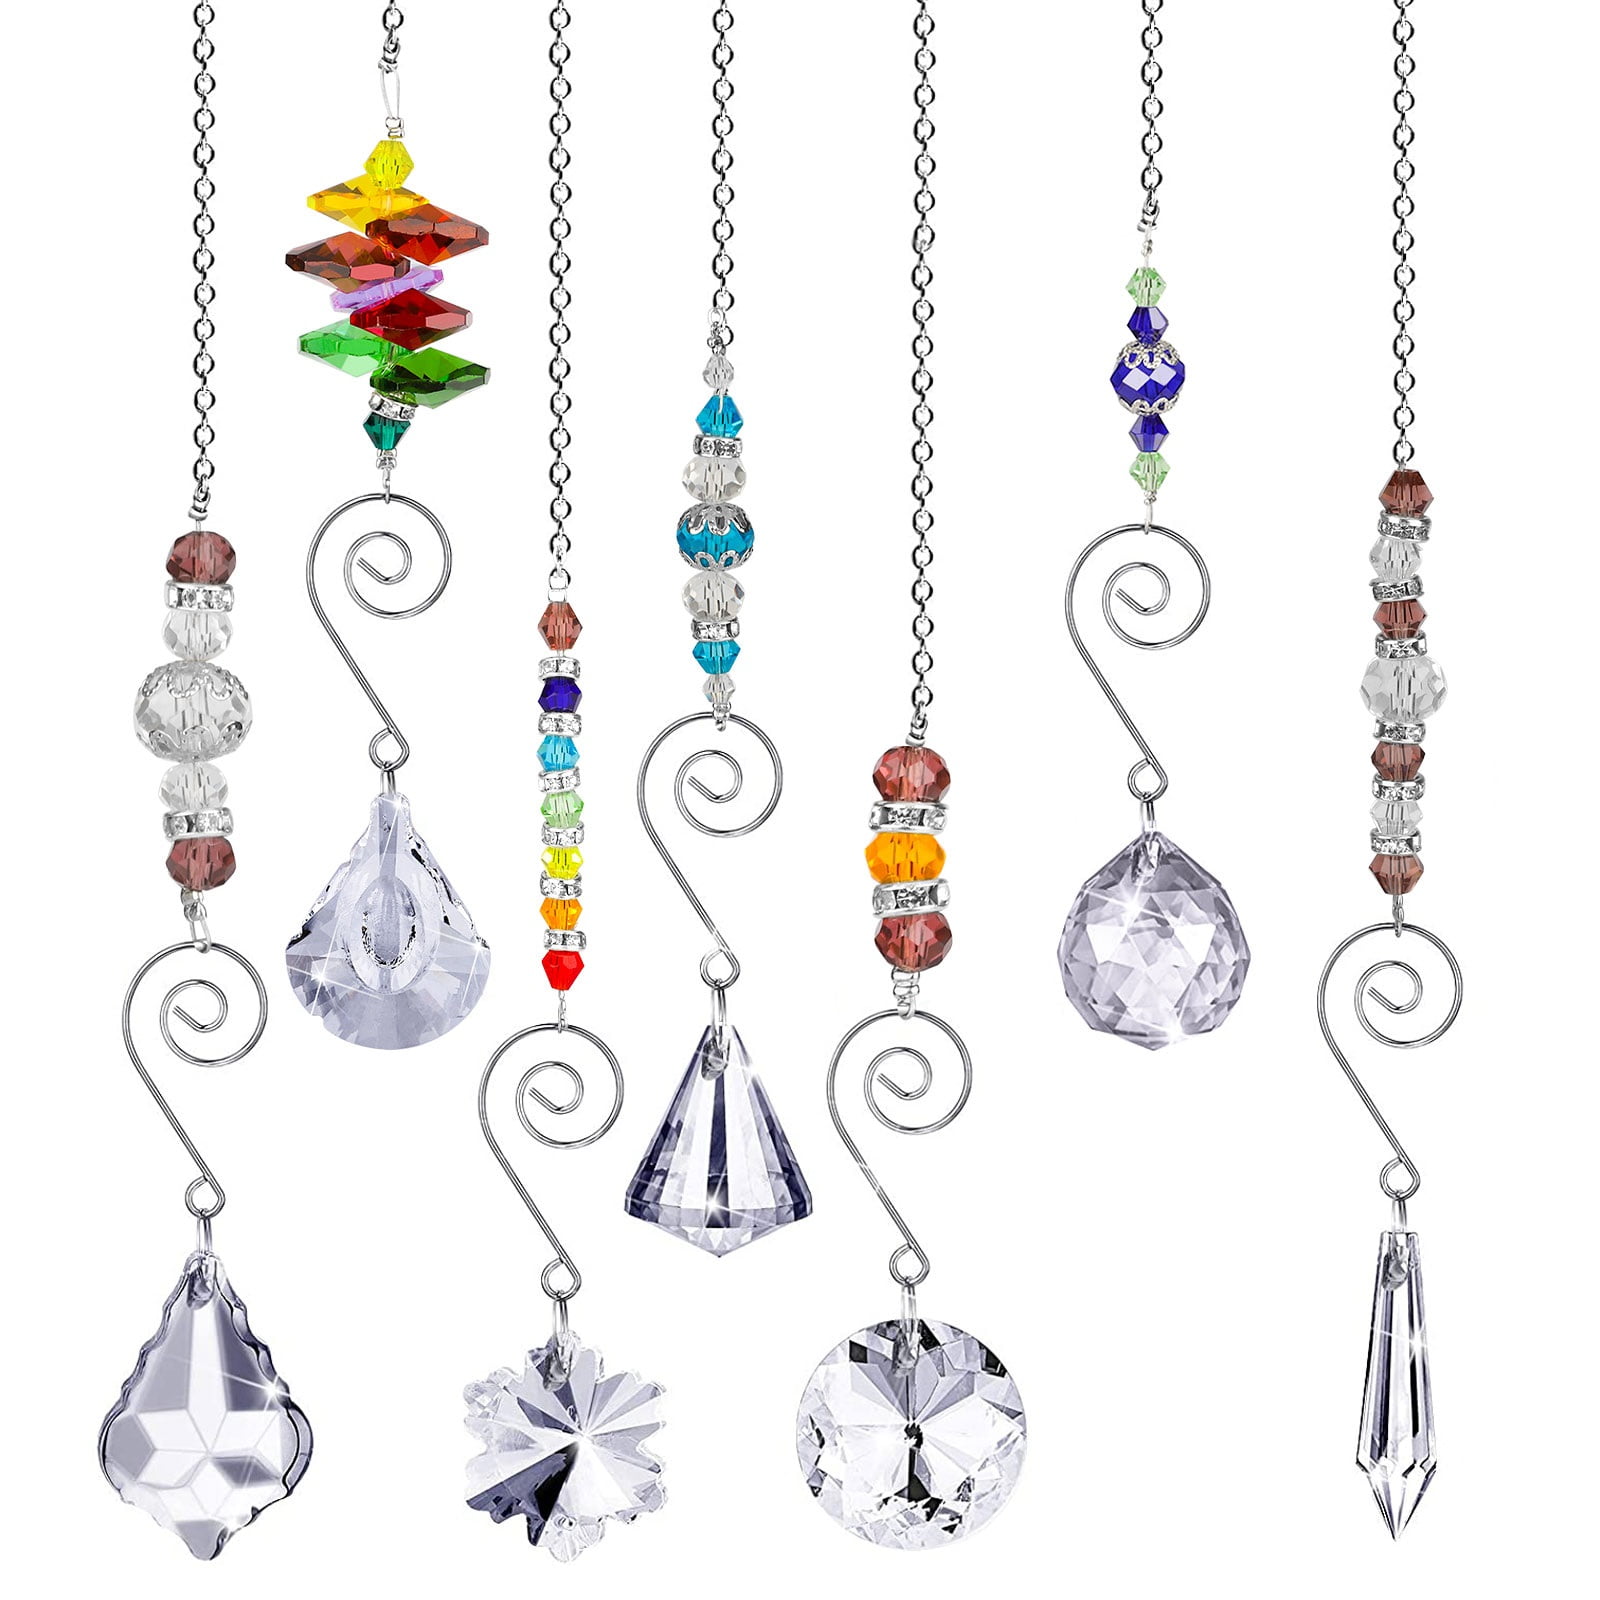 Blue Crystal Prism Pendant Clear Crystal Bead Pendants Suncatcher Hanging Tree Ornaments for Wedding Christmas Decoration 